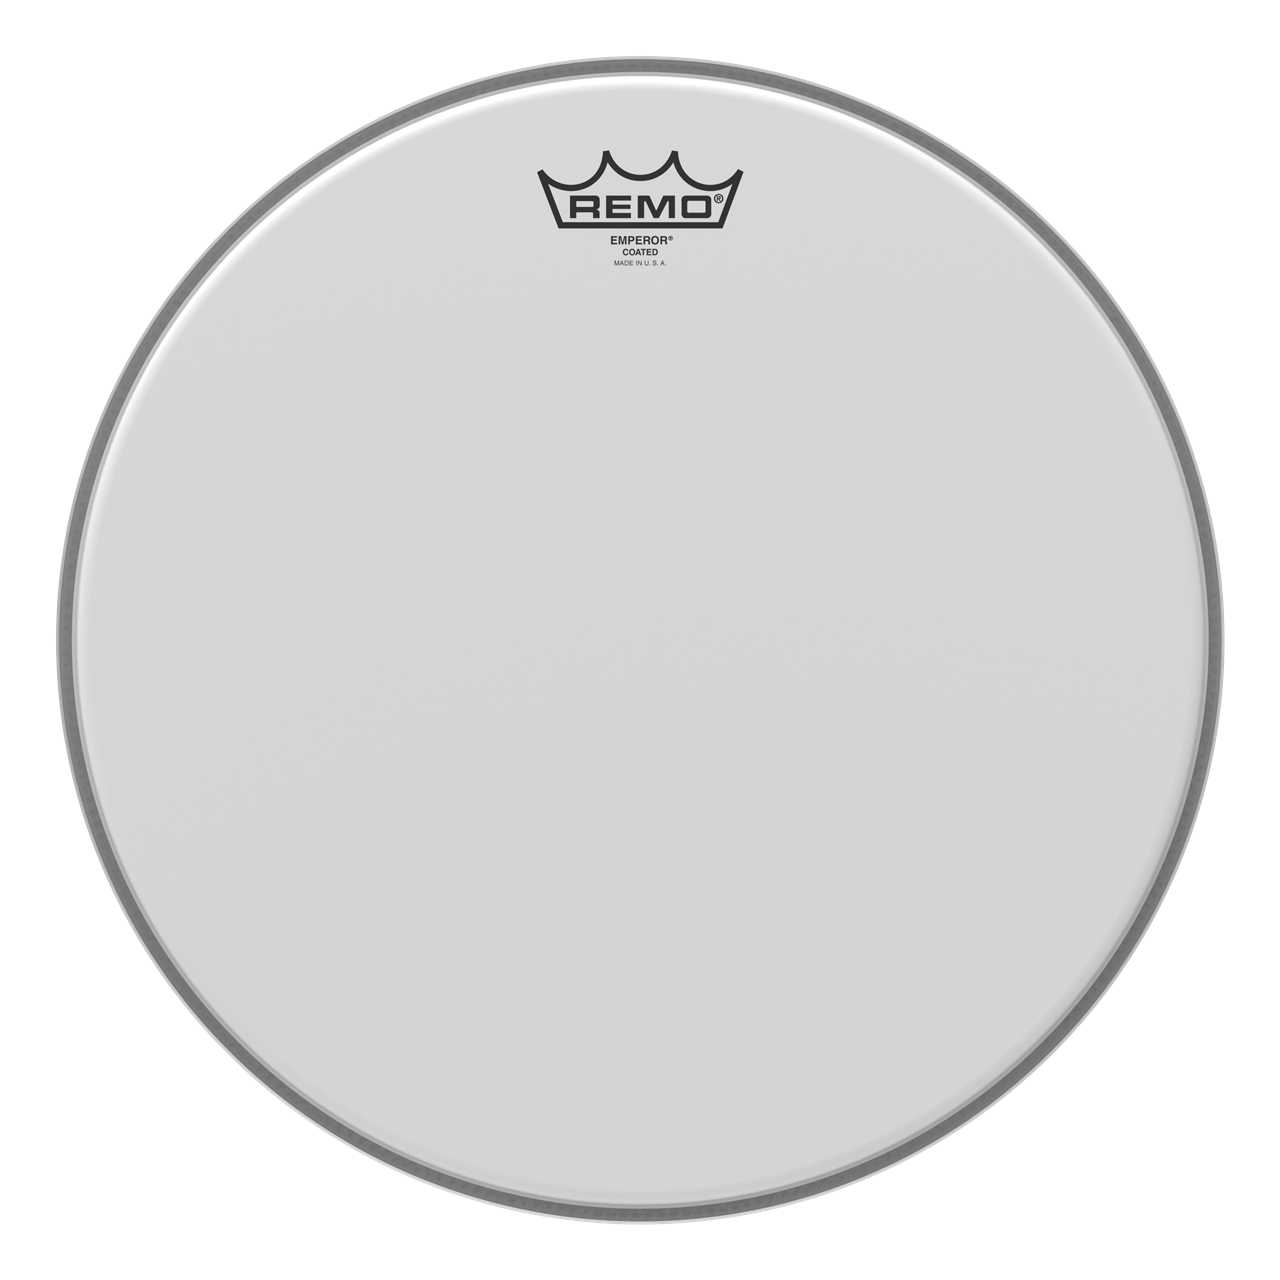 Remo BE-0110-00 Emperor, 10" Coated